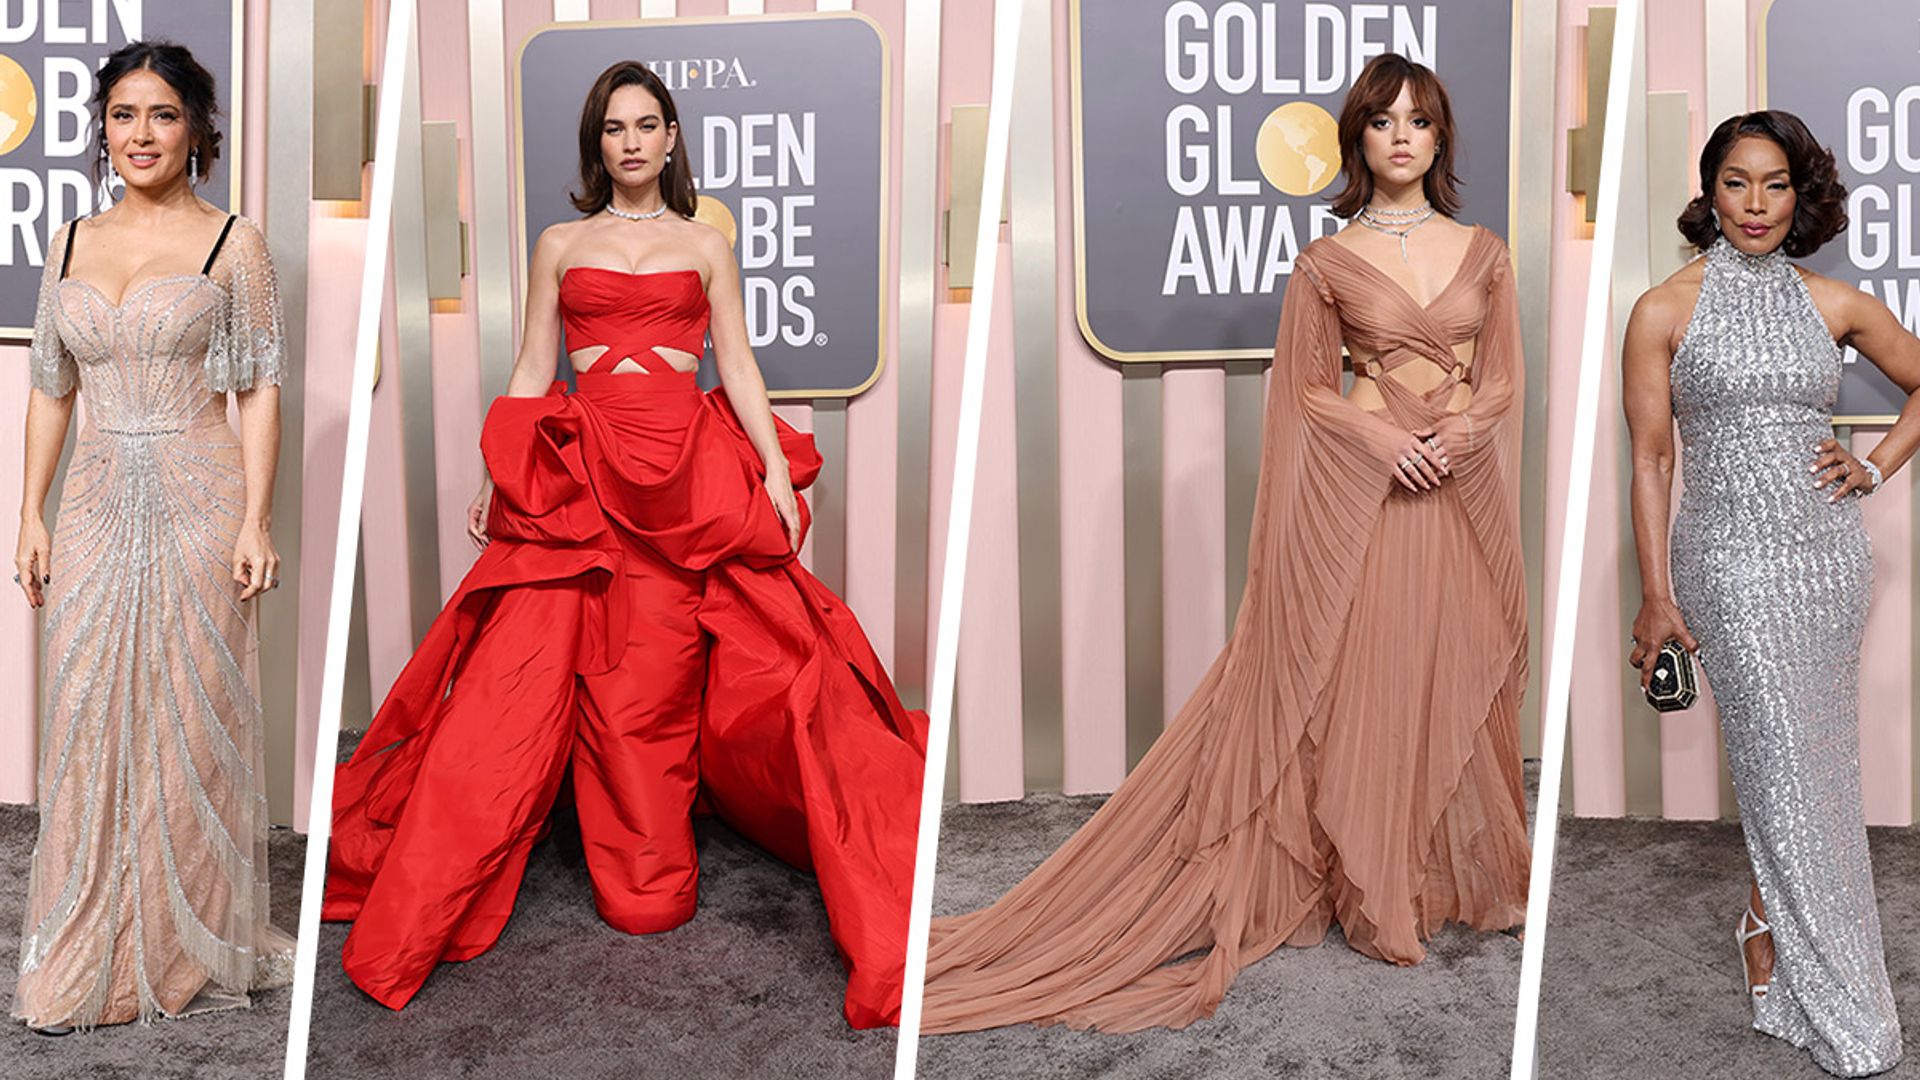 Golden globes 2023 red carpet: best dressed from Lily James to Salma Hayek